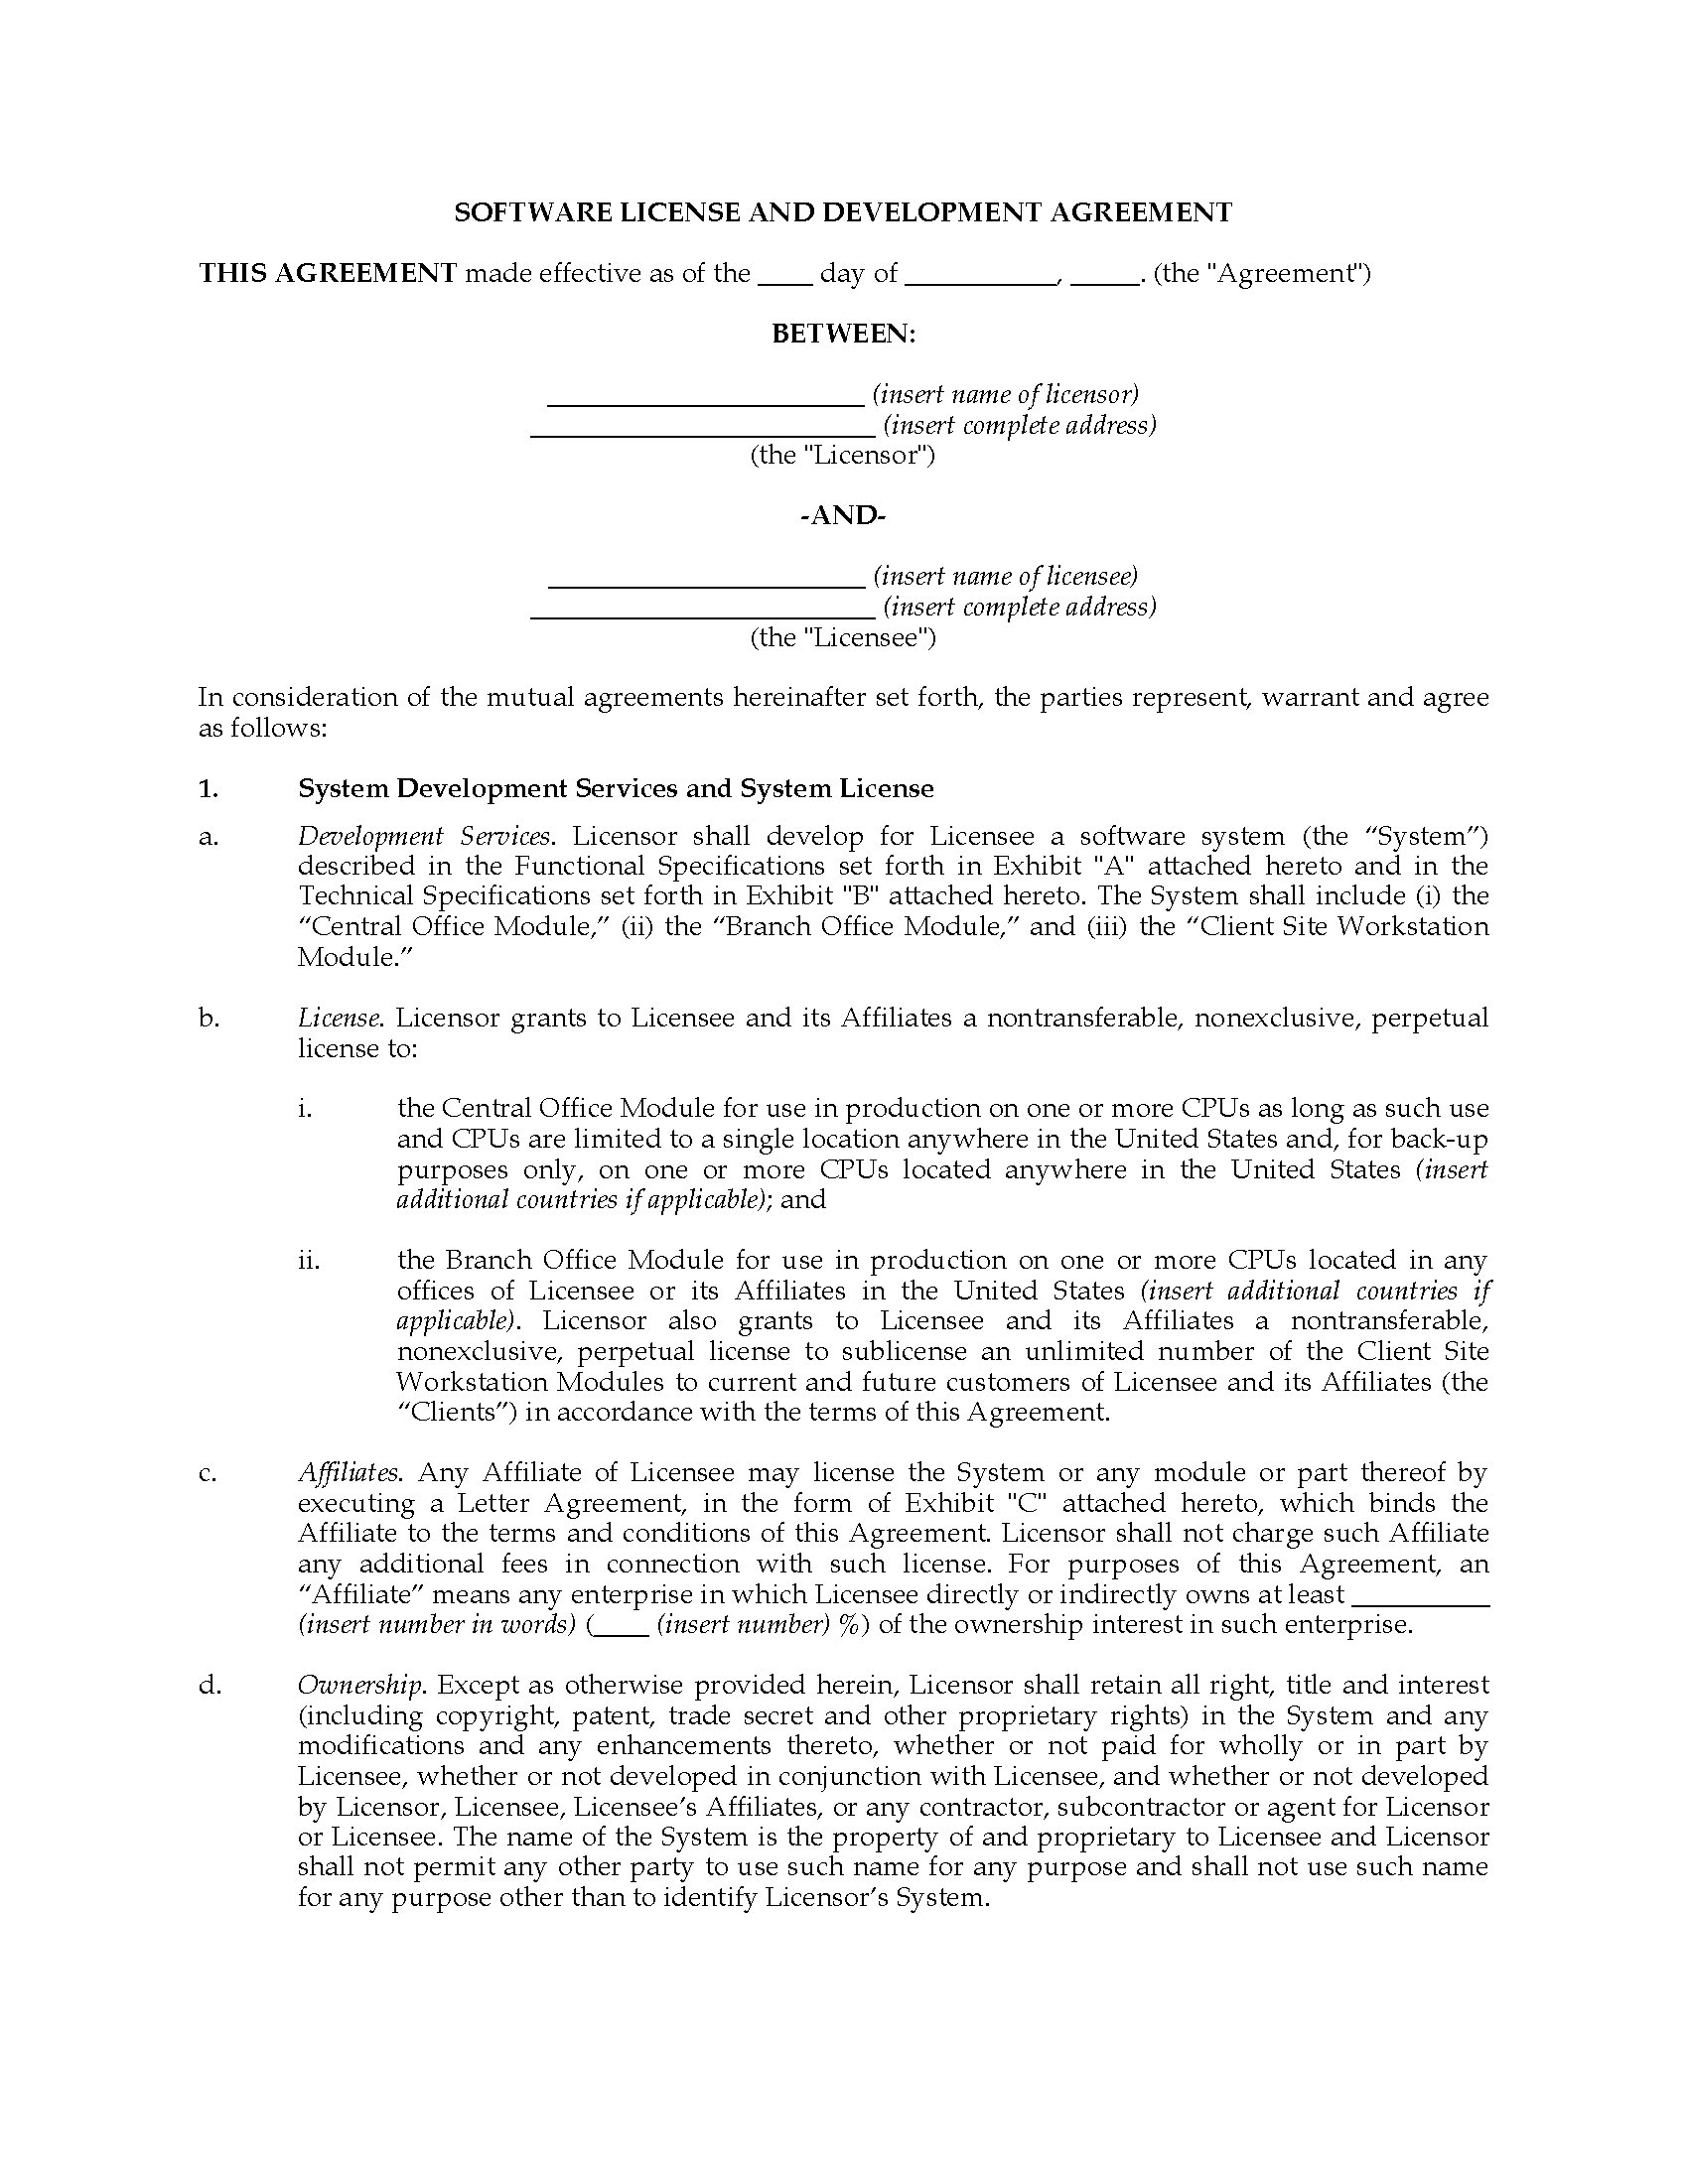 USA Software License and Development Agreement Legal Forms and